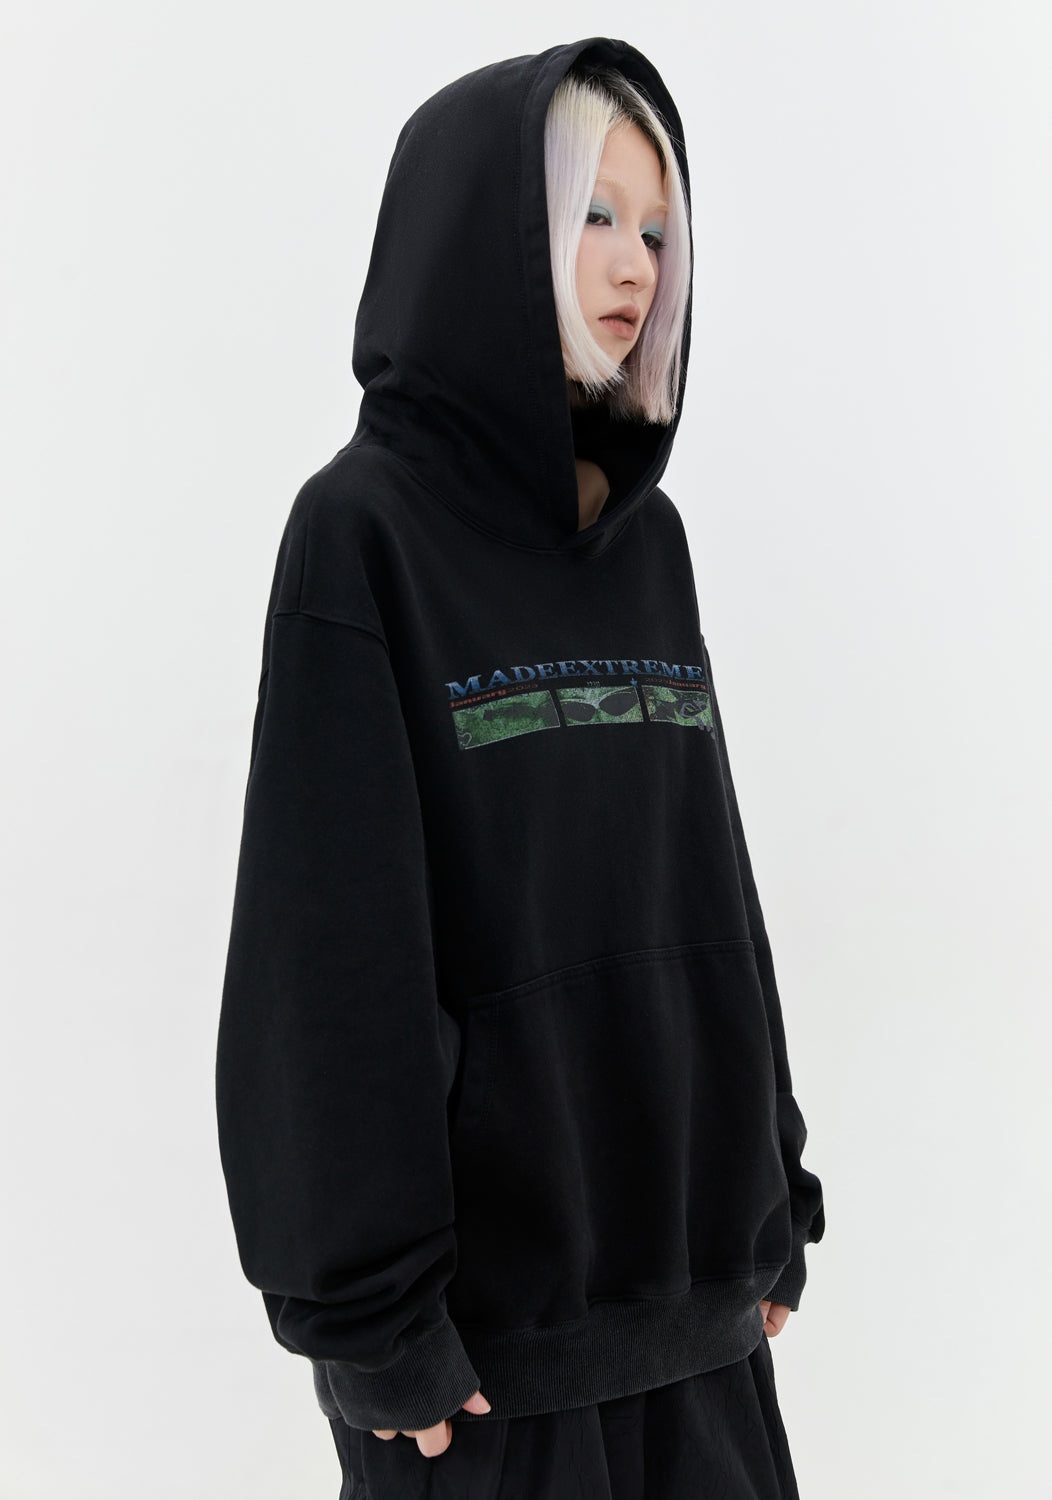 MUSIC ALBUMS FROM ANOTHER PLANET HOODIE